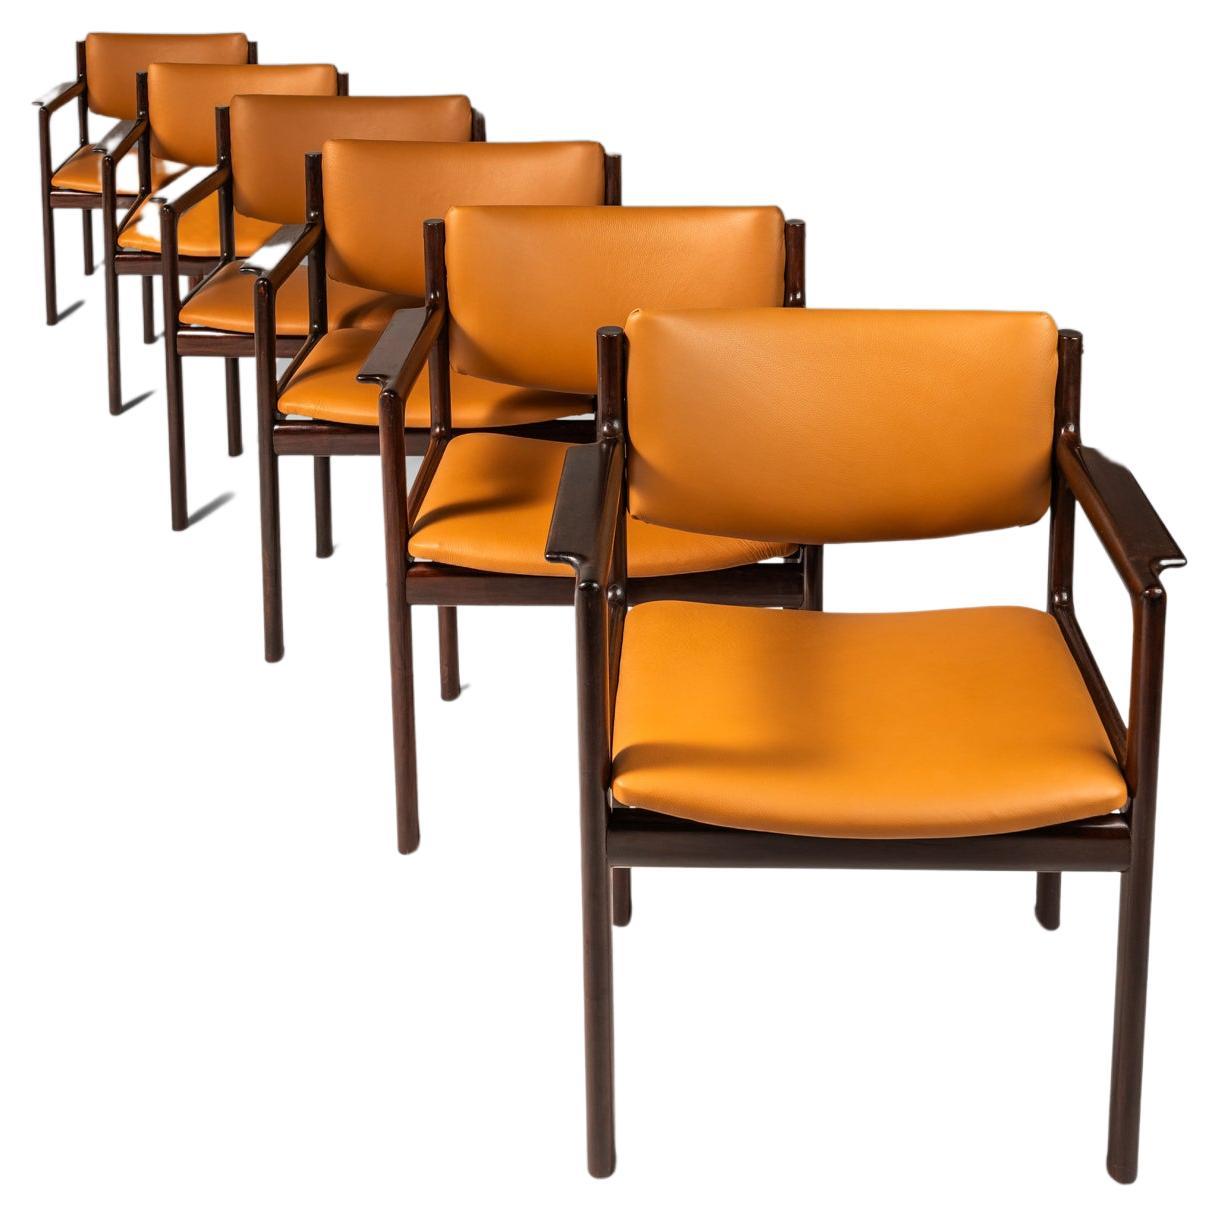 Set of 6 Mahogany & Leather Arm Chairs, by Danish Overseas Imports, c. 1960's For Sale